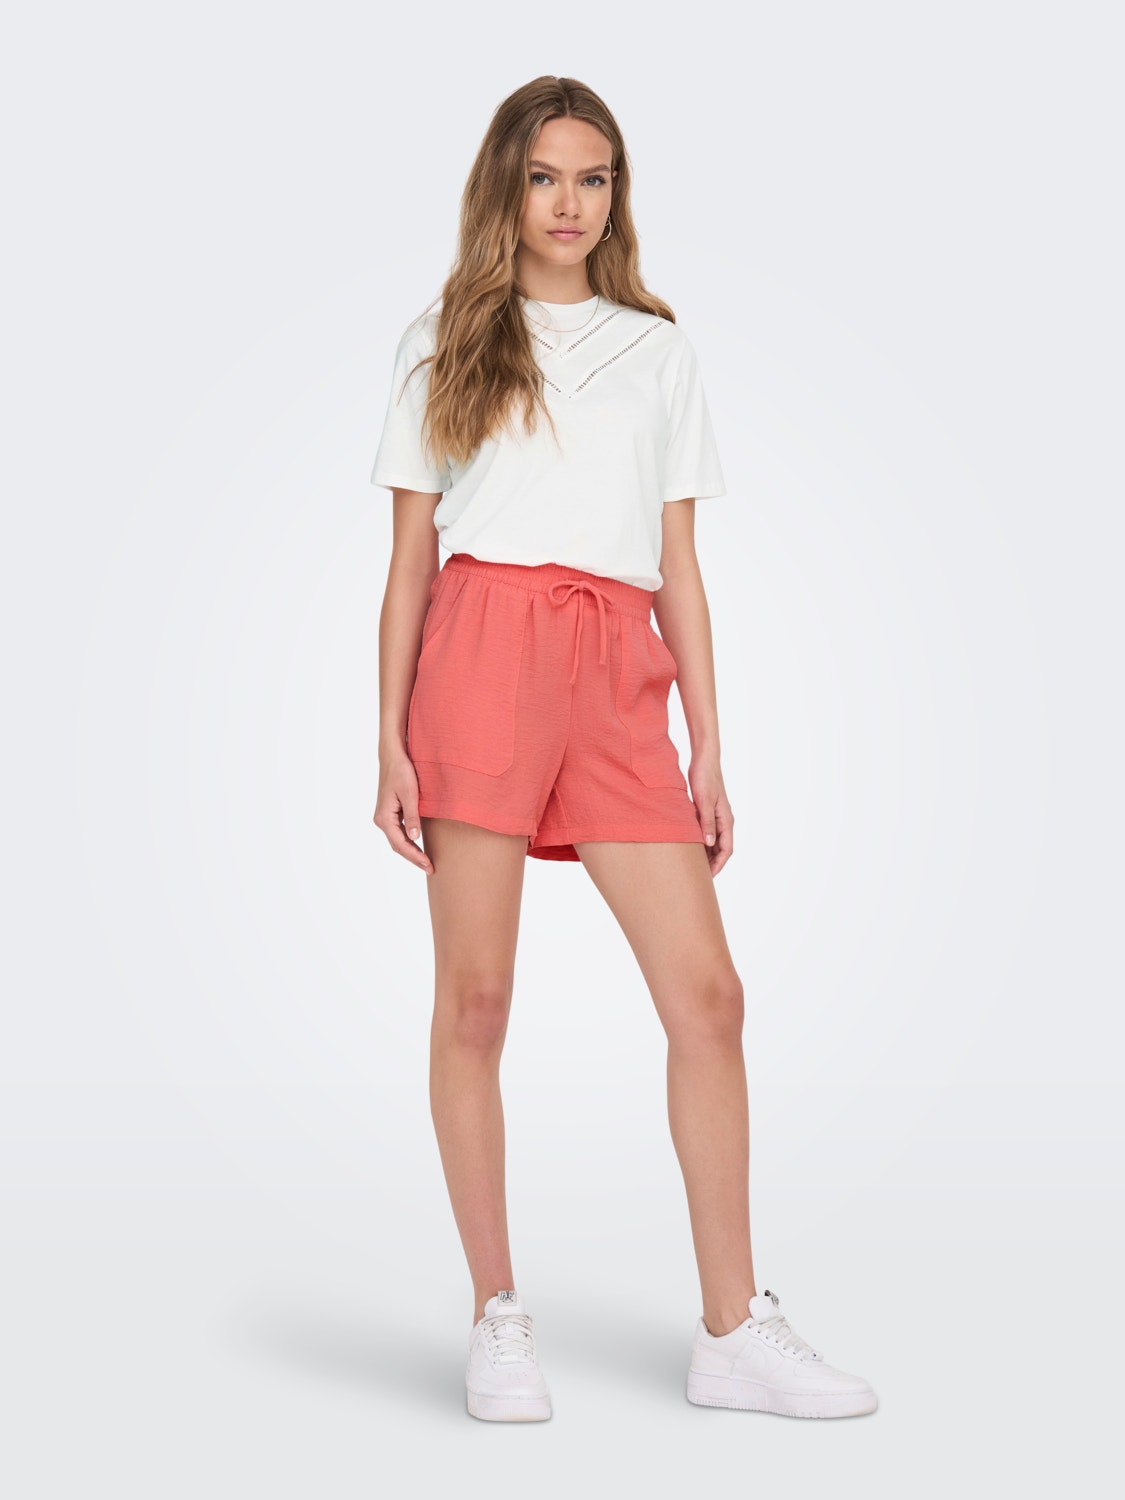 ONLY Loose Fit Shorts -Georgia Peach - 15229049